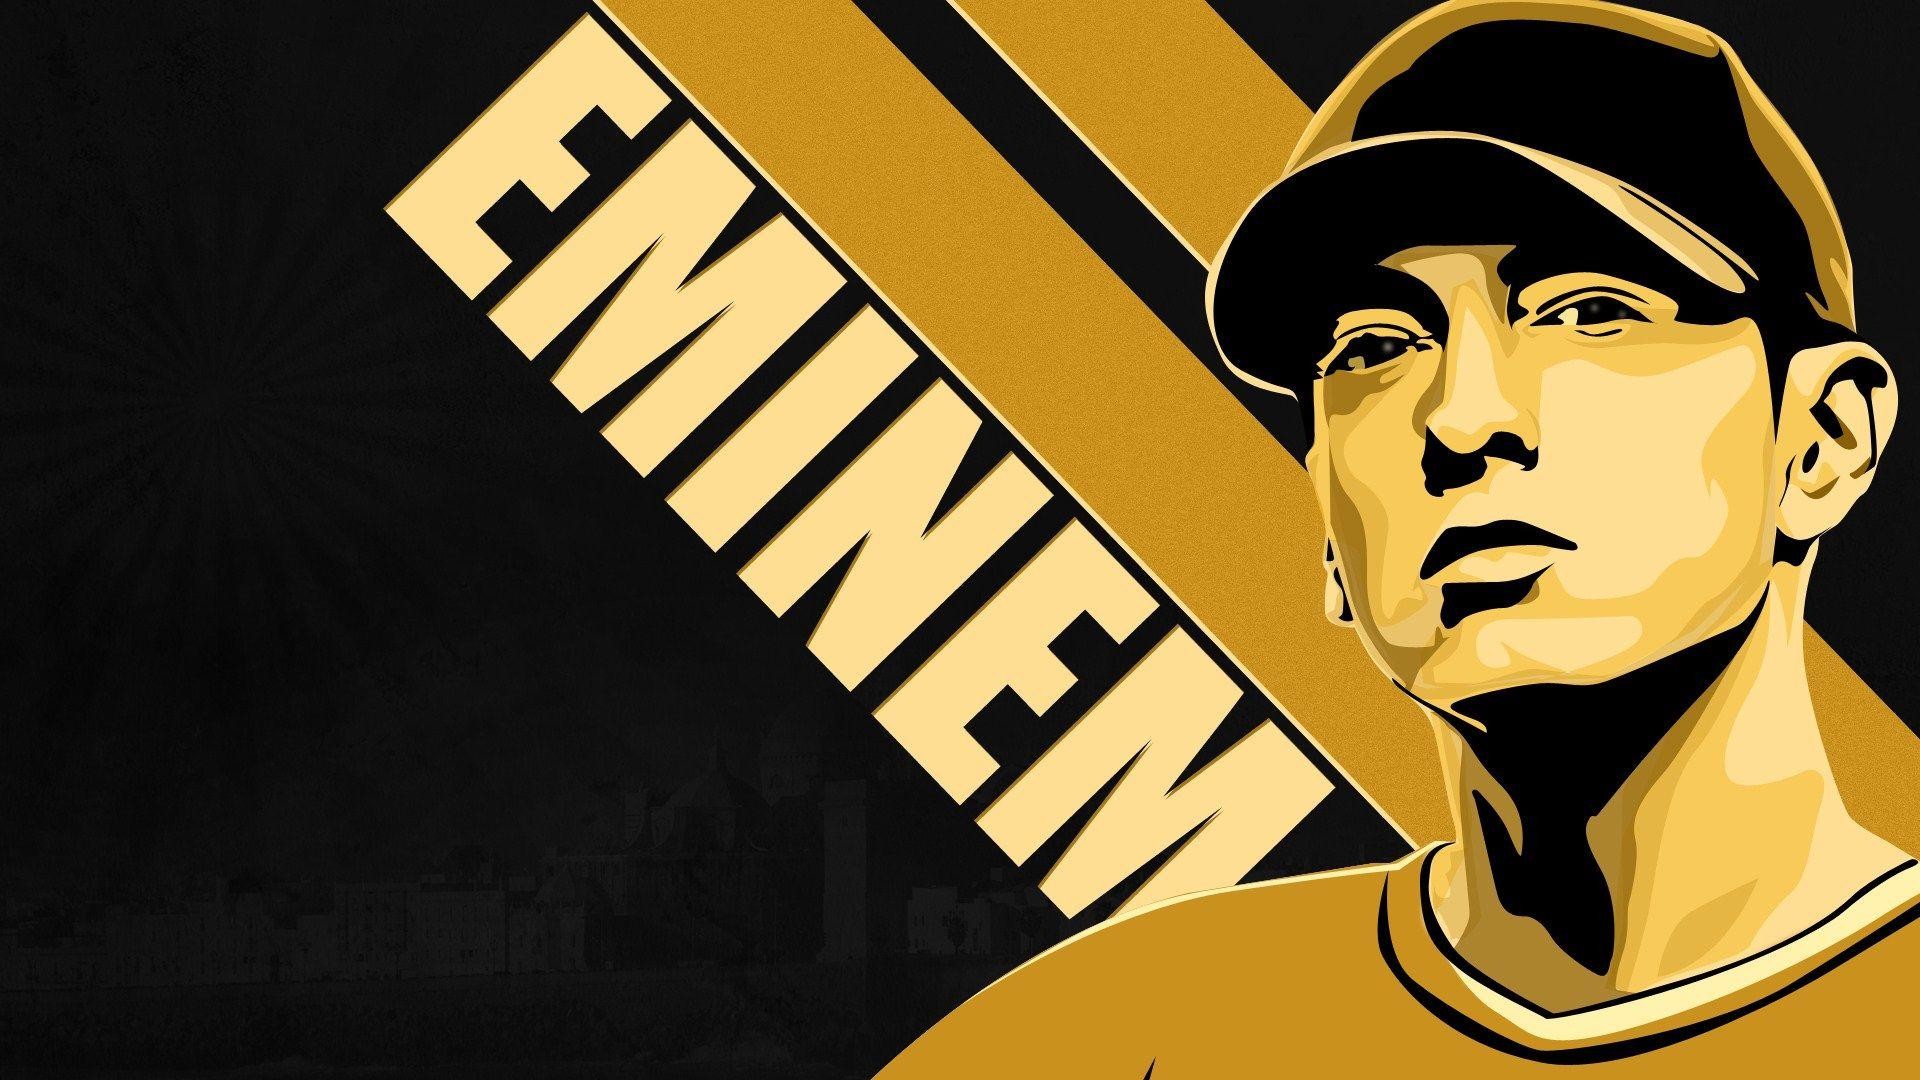 1920x1080 Eminem Wallpapers HD | Wallpapers, Backgrounds, Images, Art Photos.